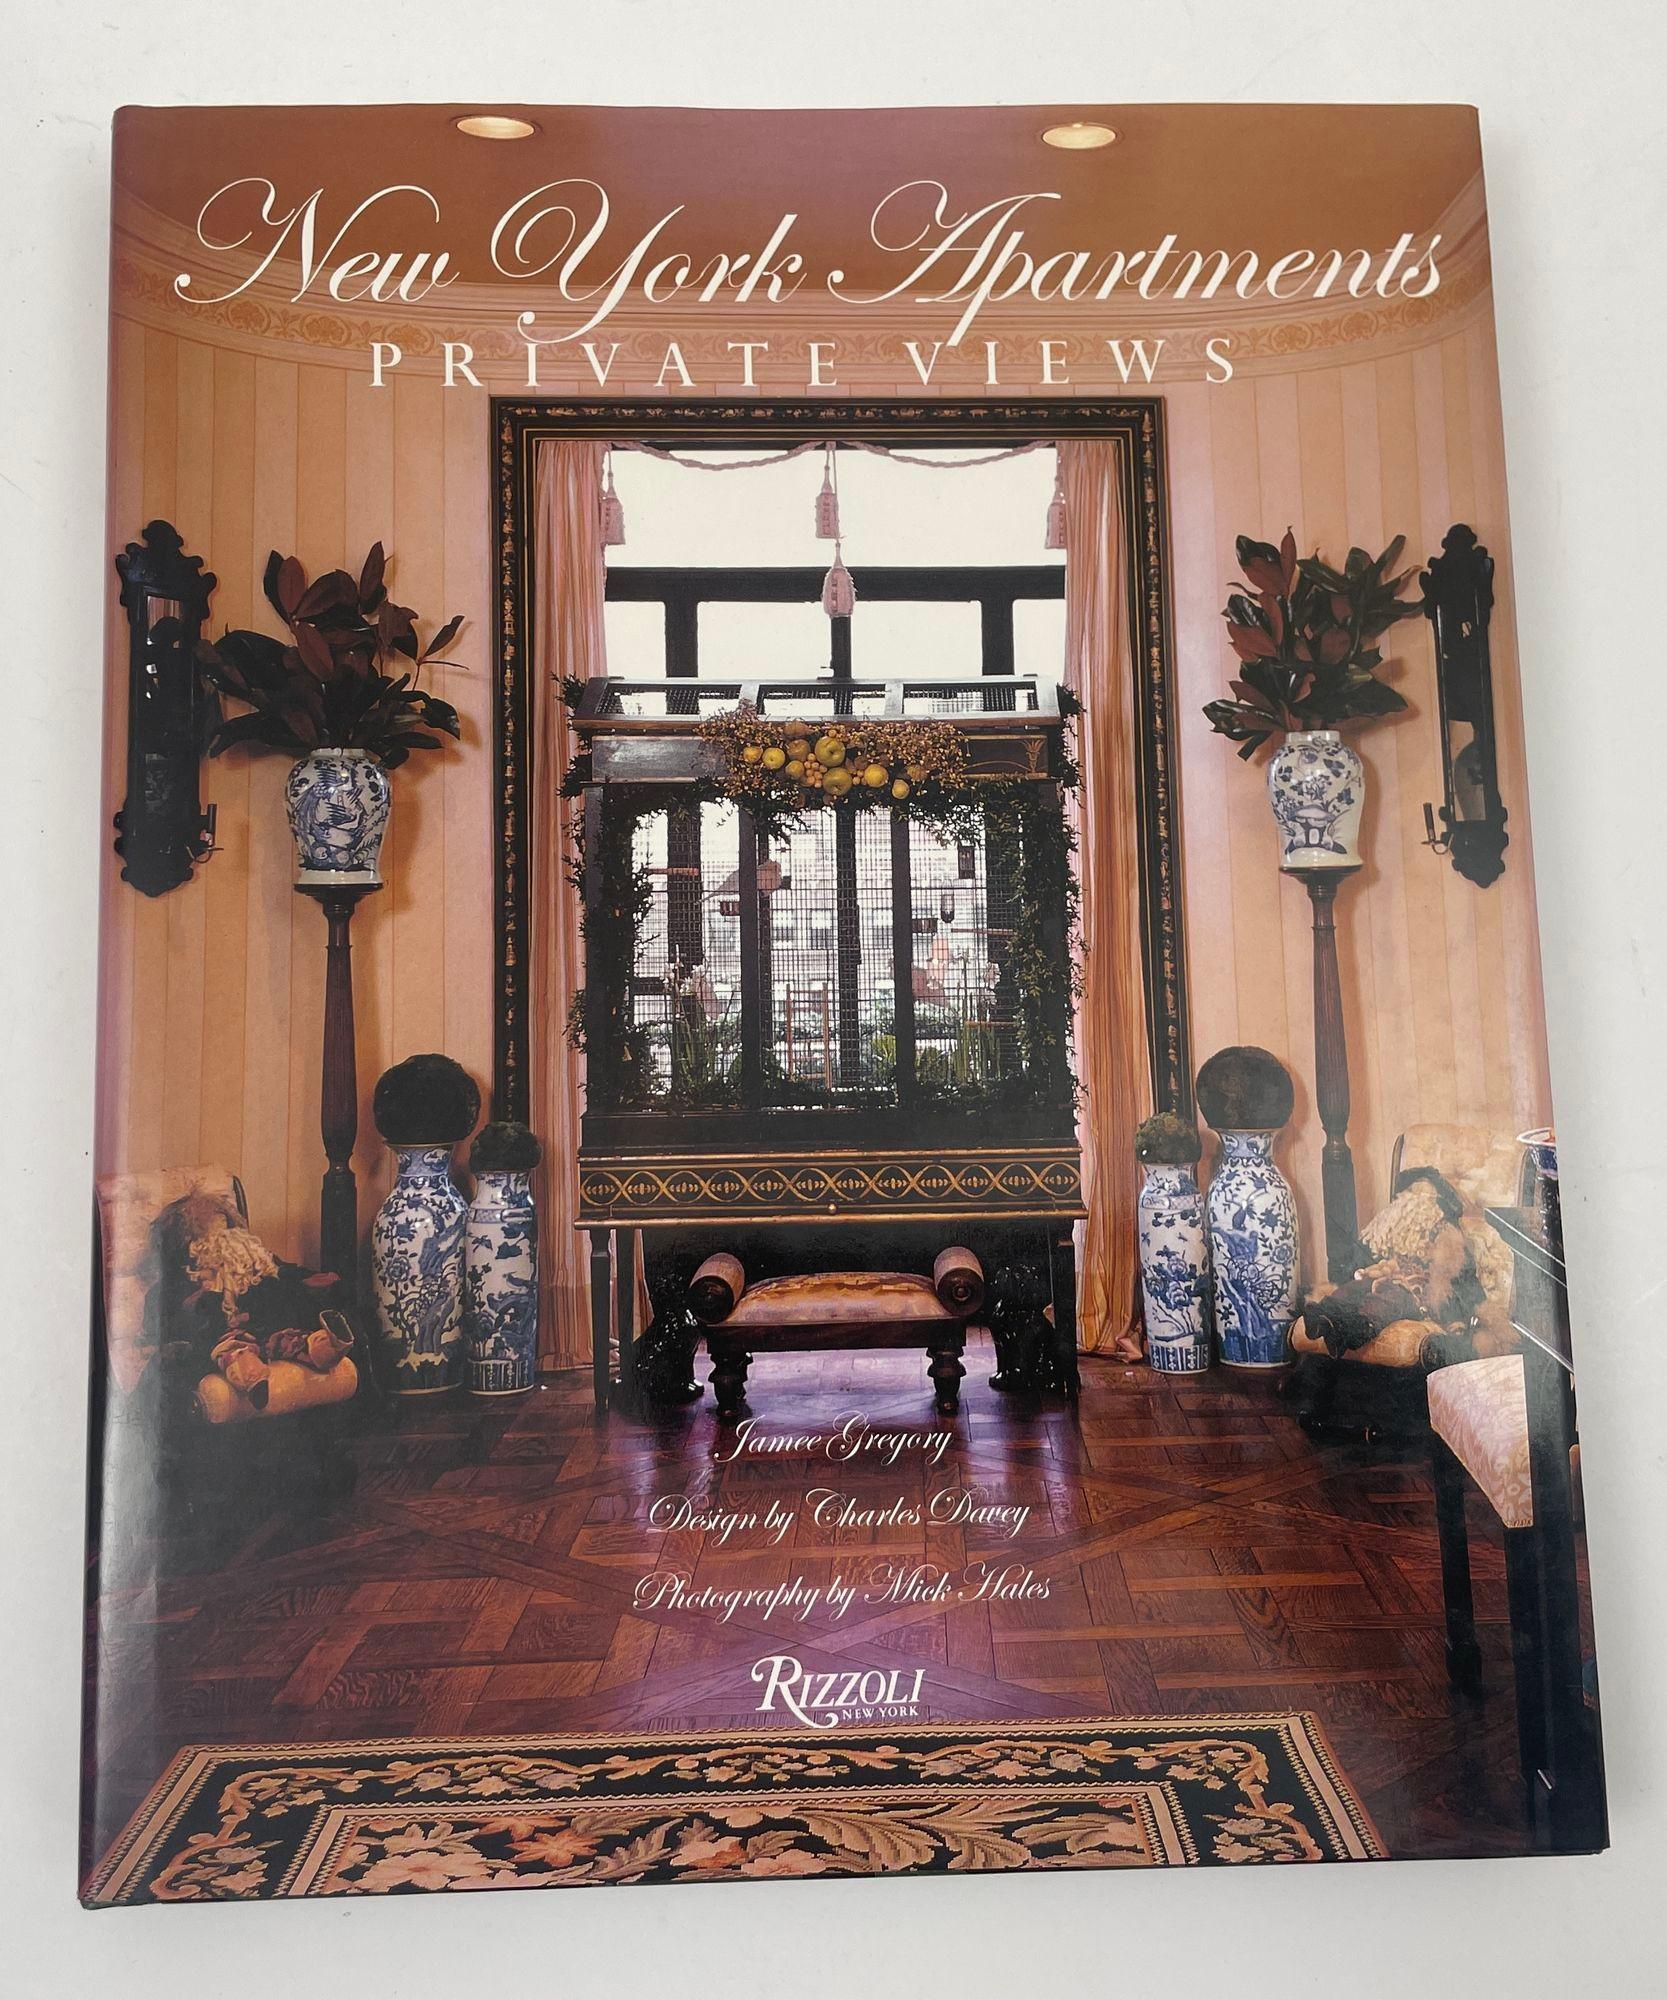 New York Apartments: Private Views By Jamee Gregory Hardcover 2004 For Sale 5